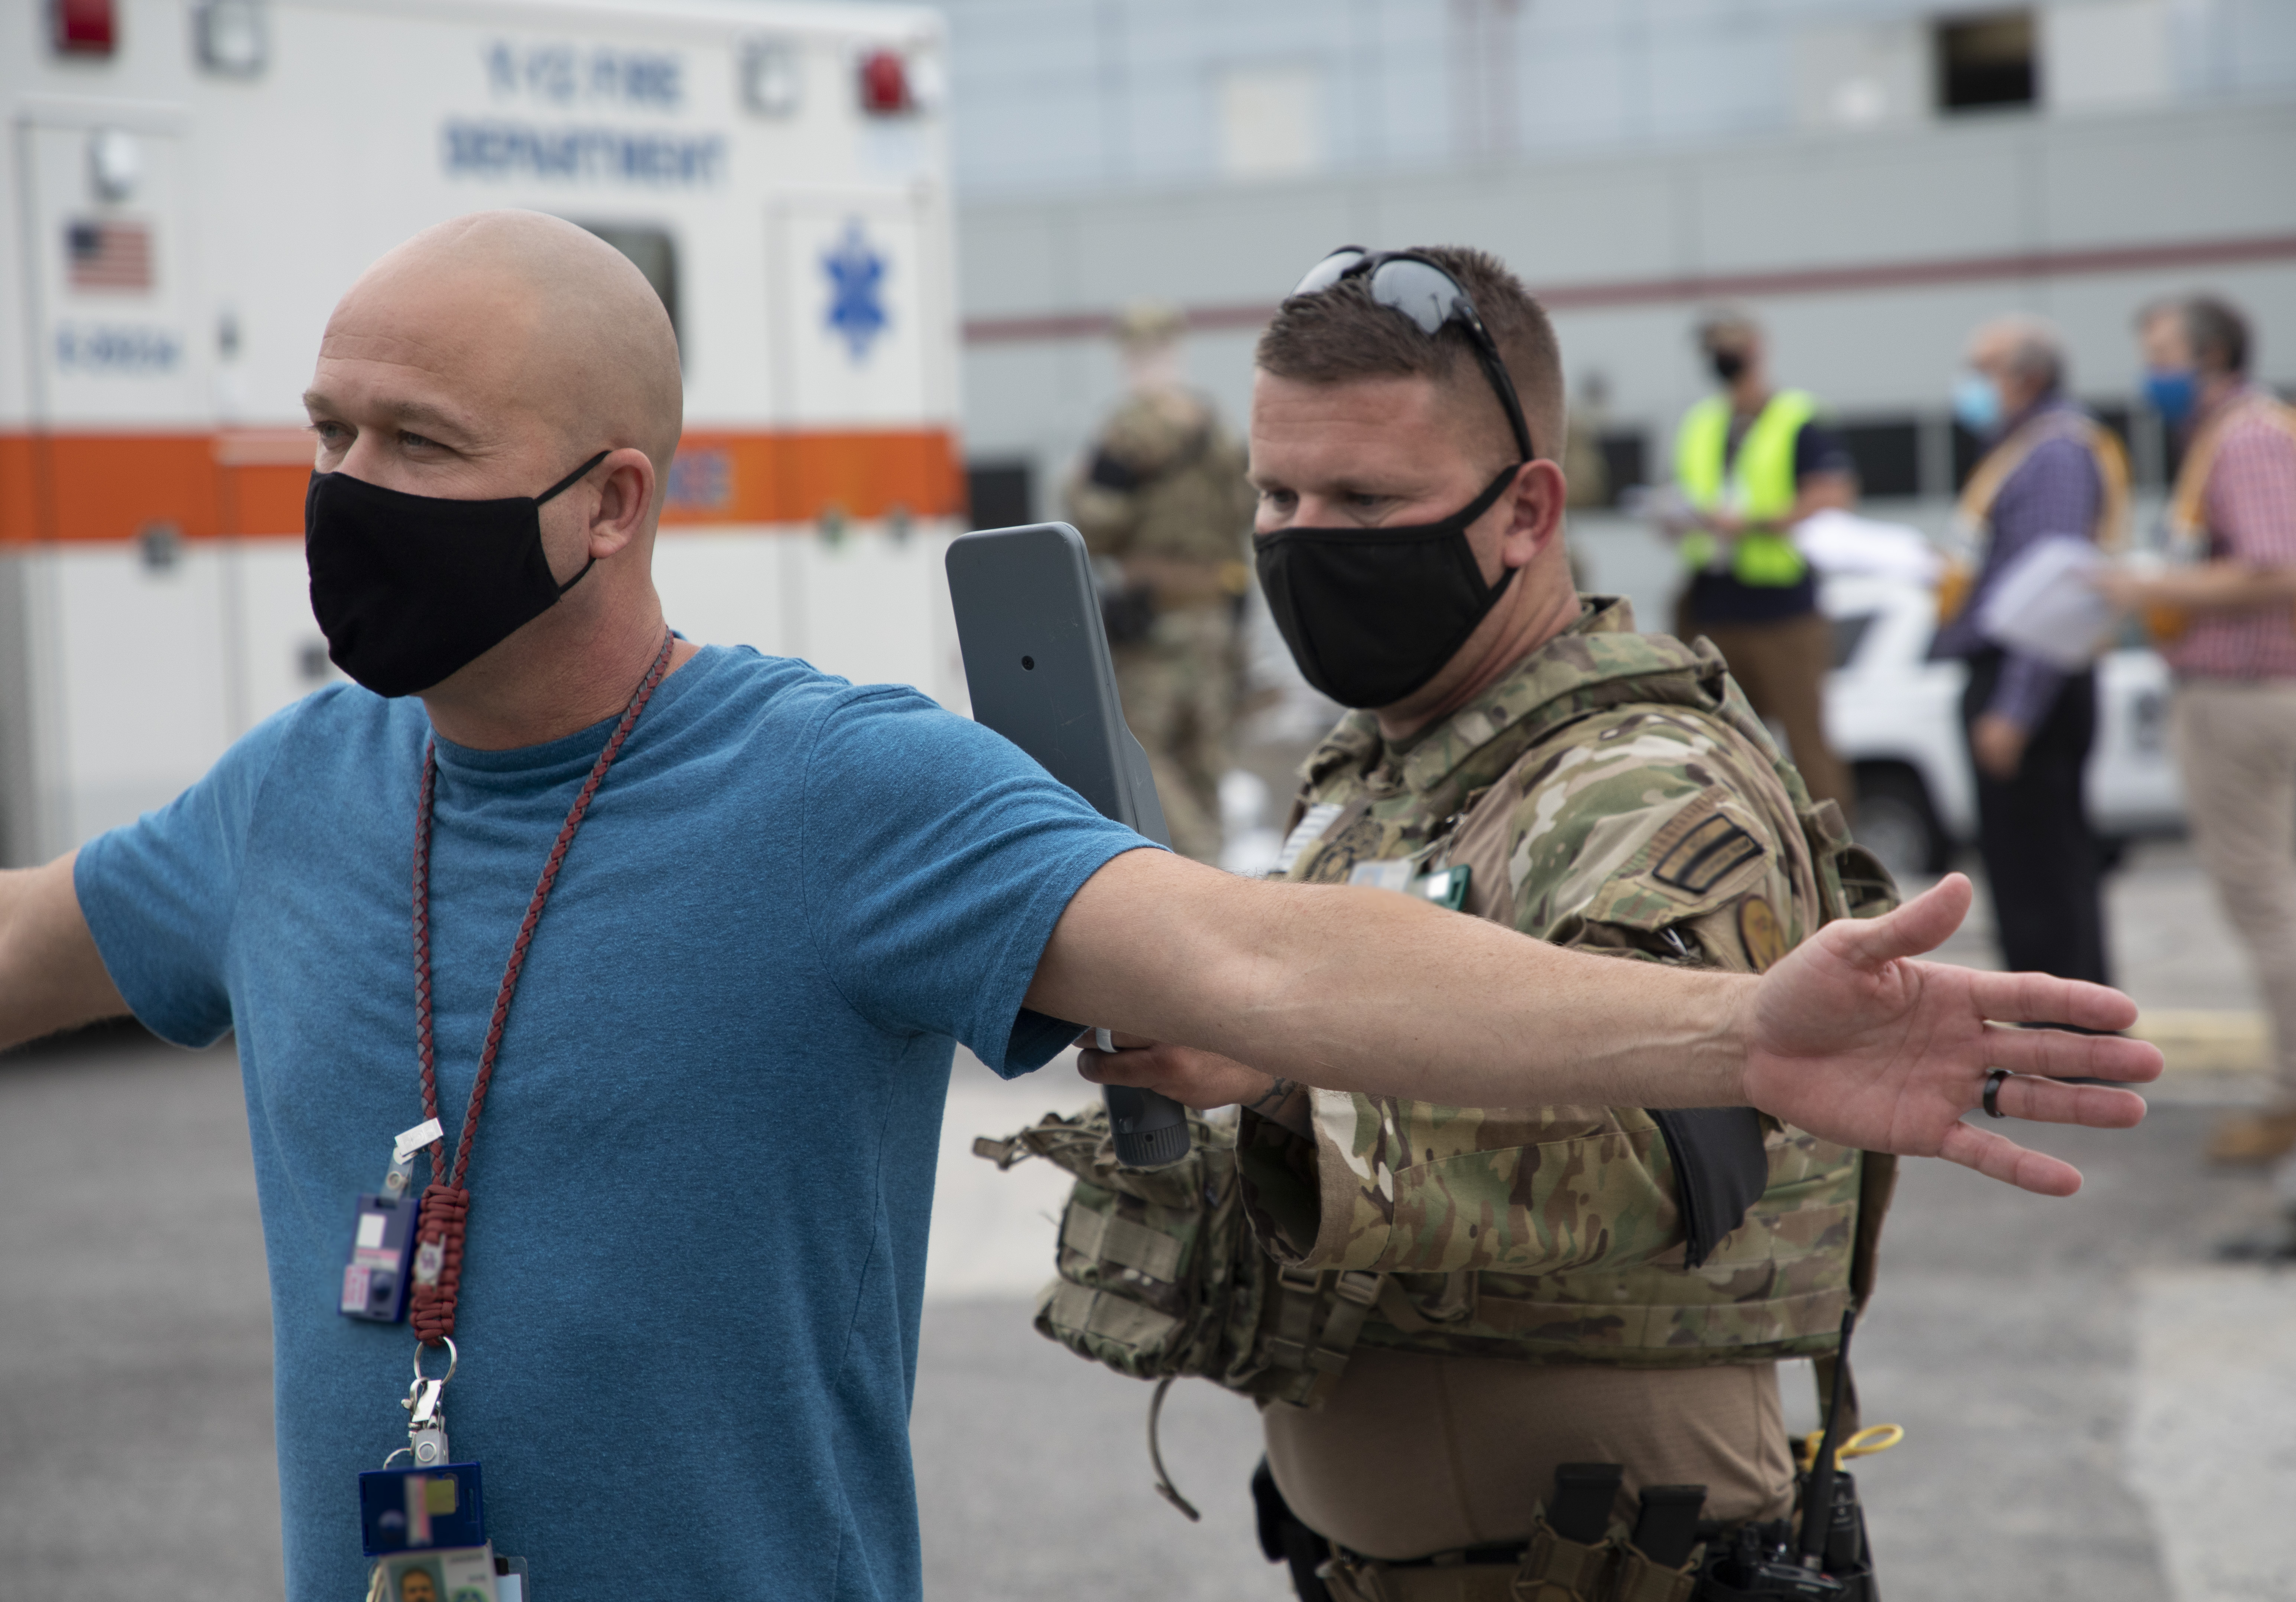 From taking responders’ temperatures to masks and social distancing, precautions ensured the Y-12 emergency management exercise was conducted safely. 